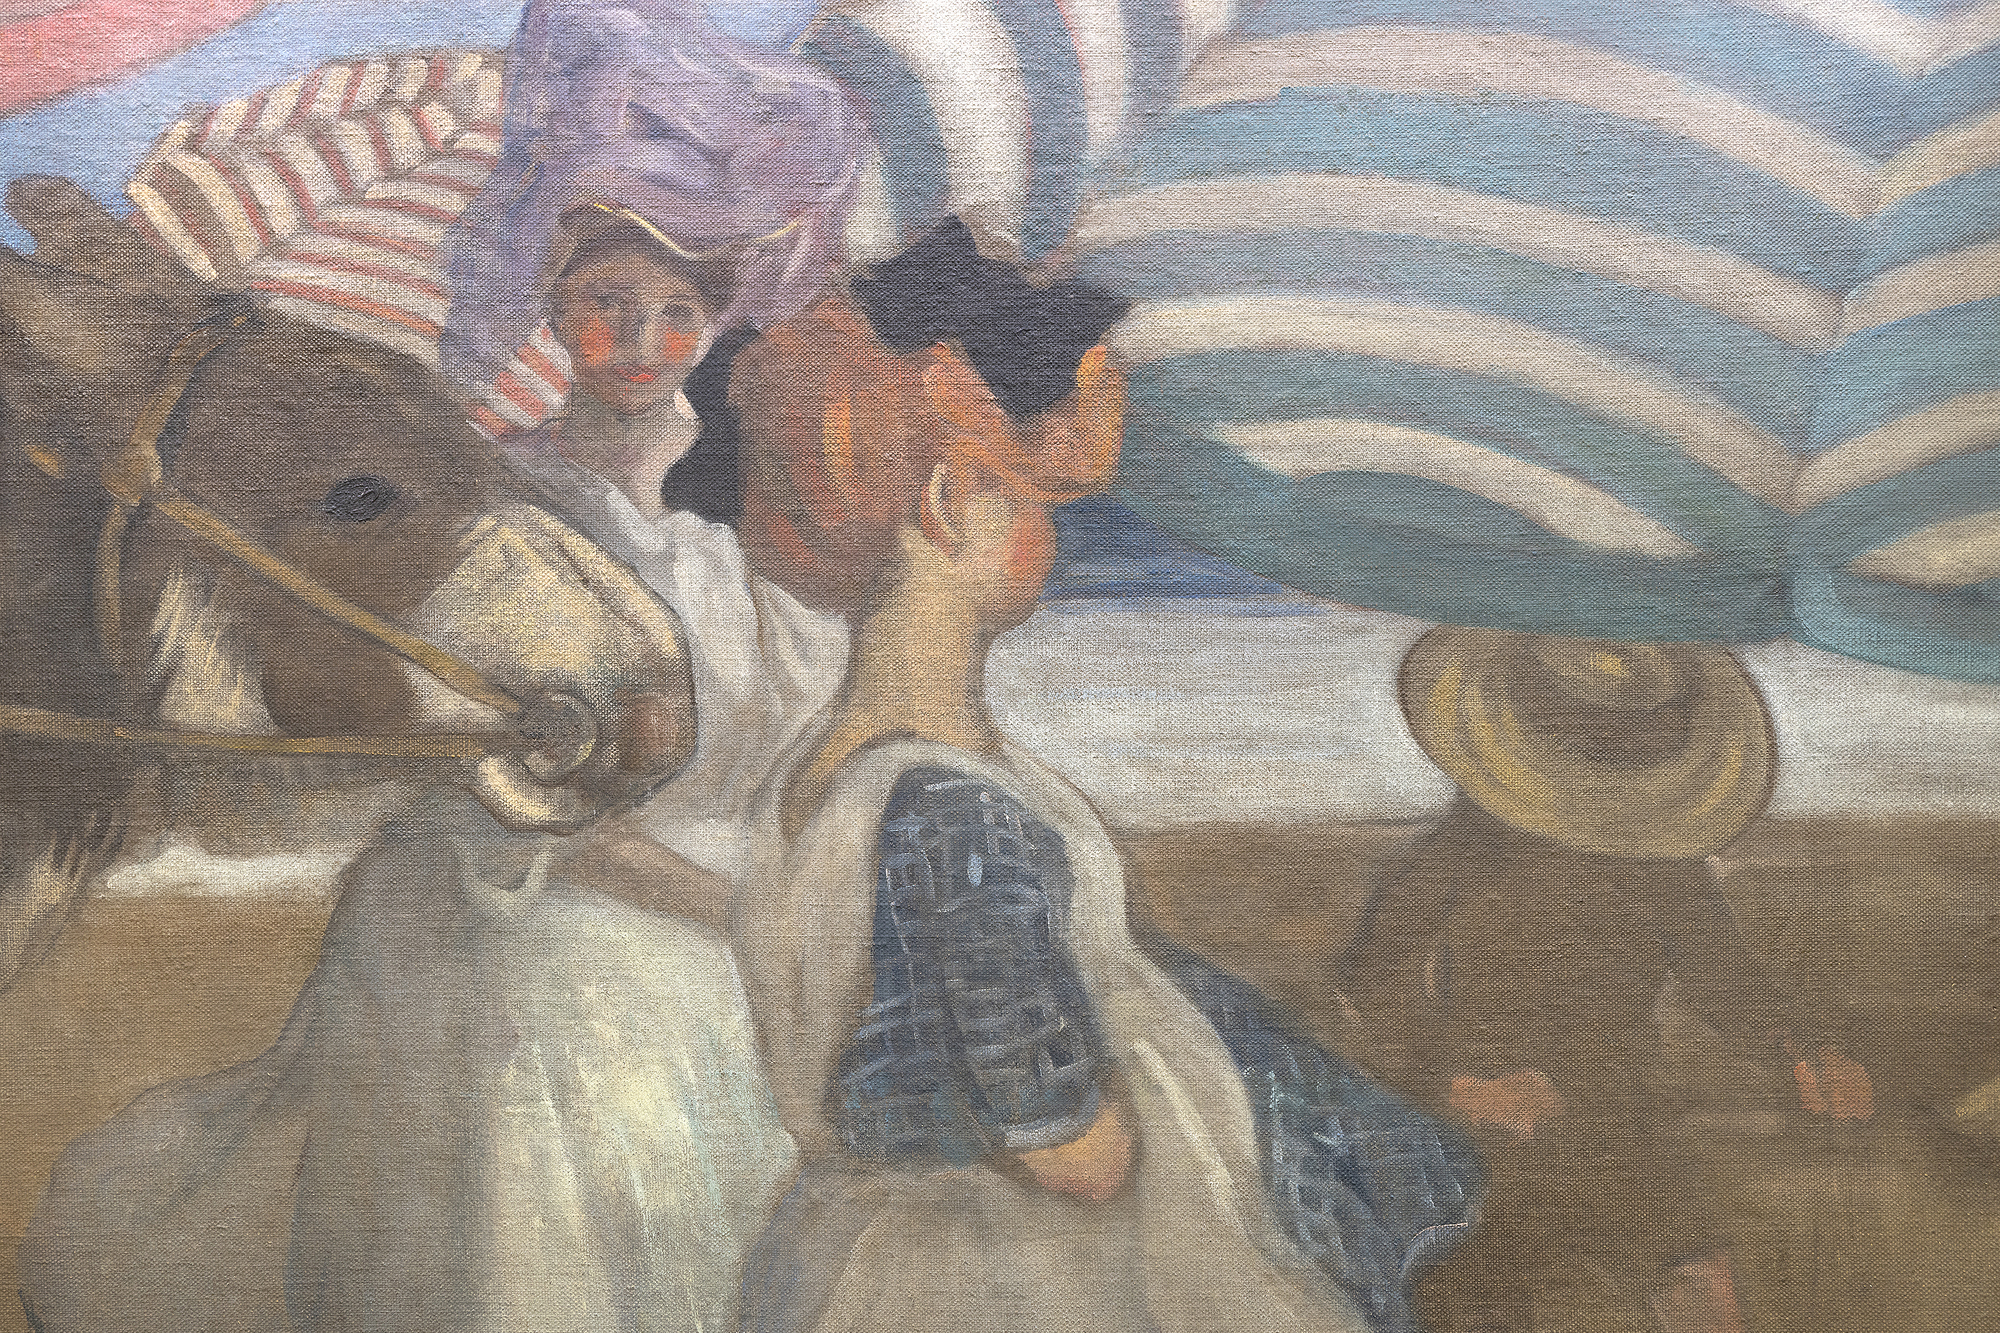 Frederick Frieseke is often regarded as the finest American Impressionist painter of the figure. Yet when he came to study at Académie Juilian in 1898, several les Nabis painters remained a lingering presence, and it was the rich, decorative patterns of Edouard Vuillard and Pierre Bonnard that served as the blueprint for his early success. That influence is clearly demonstrated in the unrestrained repetition of the voluminous, pleated, striped umbrellas of Afternoon at the Beach, a canvas mural installed in the opulent Hotel Shelburne dining room overlooking the Atlantic City Boardwalk. The unifying impact of that repetitive element imbues the setting with cloud-like loft within a color scheme, evoking Vuillard and the richness of a Gobelin tapestry, rather than the effect of sunlight and broken color that mark his more familiar paintings from the decade of 1910 to 1920.&lt;br&gt;&lt;br&gt;Afternoon at the Beach was installed under the artist’s direction in February 1906. It remained on view for decades at the swanky hotel that enticed “Diamond Jim” James Buchanan Brady to pay one thousand dollars a week for permanent residence and was an unfading memory for throngs of well-heeled socialites, financiers, and notables from Irving Berlin to John Philip Sousa and Ethel Barrymore to Al Jolson. Undoubtedly, its presence high on the grand dining room wall contributed to the artist’s popularity and renown.&lt;br&gt;&lt;br&gt;Today, we may look upon this long, frieze-like composition as a delightful fin-de-siécle costume study or an informative expose of Victorian mores as suggested by the separate spheres of gender groupings. But mostly, Afternoon at the Beachrecounts the artist’s unbridled delight and appreciation of women, here, expressed within familial, maternal, and social contexts. It is the subject and theme that brought Frieseke acclaim and awards on both sides of the Atlantic and which, to this day, endears him to the many who count him among the most beloved of American figurative painters.